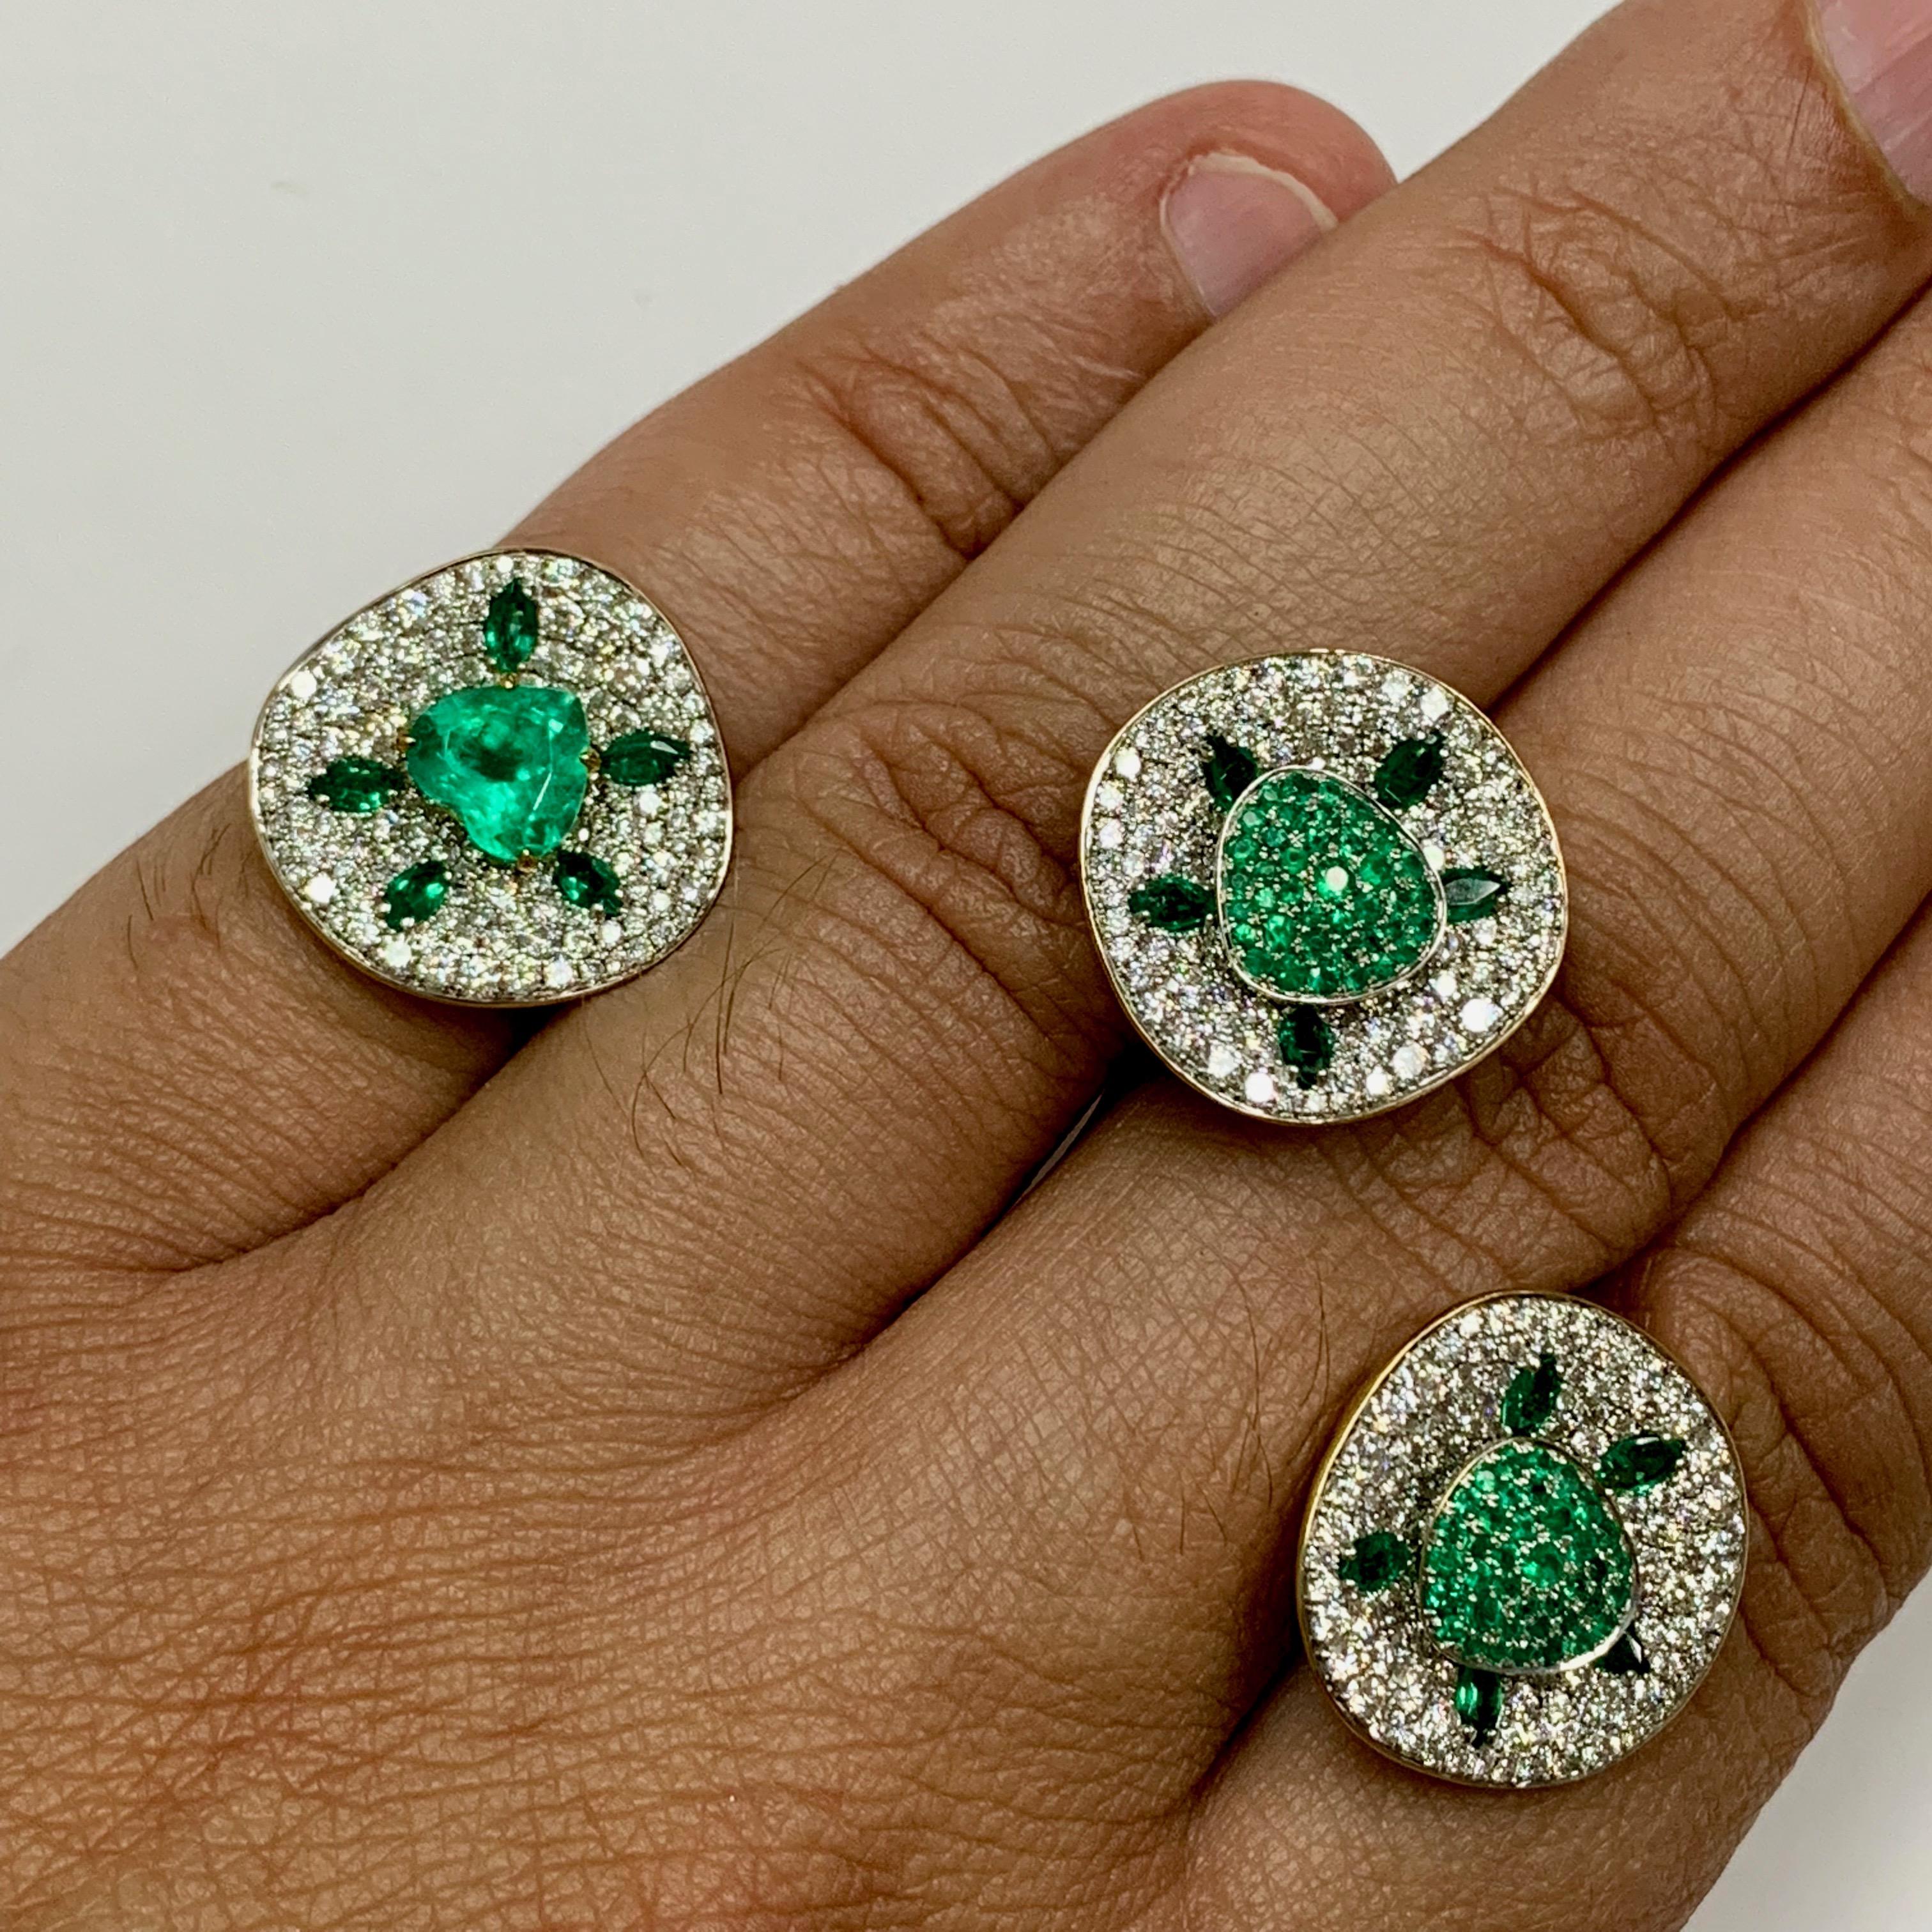 Emerald Diamond 18 Karat Yellow Gold Ring Earrings Suite

Emeralds and diamonds - always winning combination. Here we support the central Colombian Emerald of 1,37 carat with 1,93 carat of pure White Diamonds in the Ring. And melee Emerald of 1,24